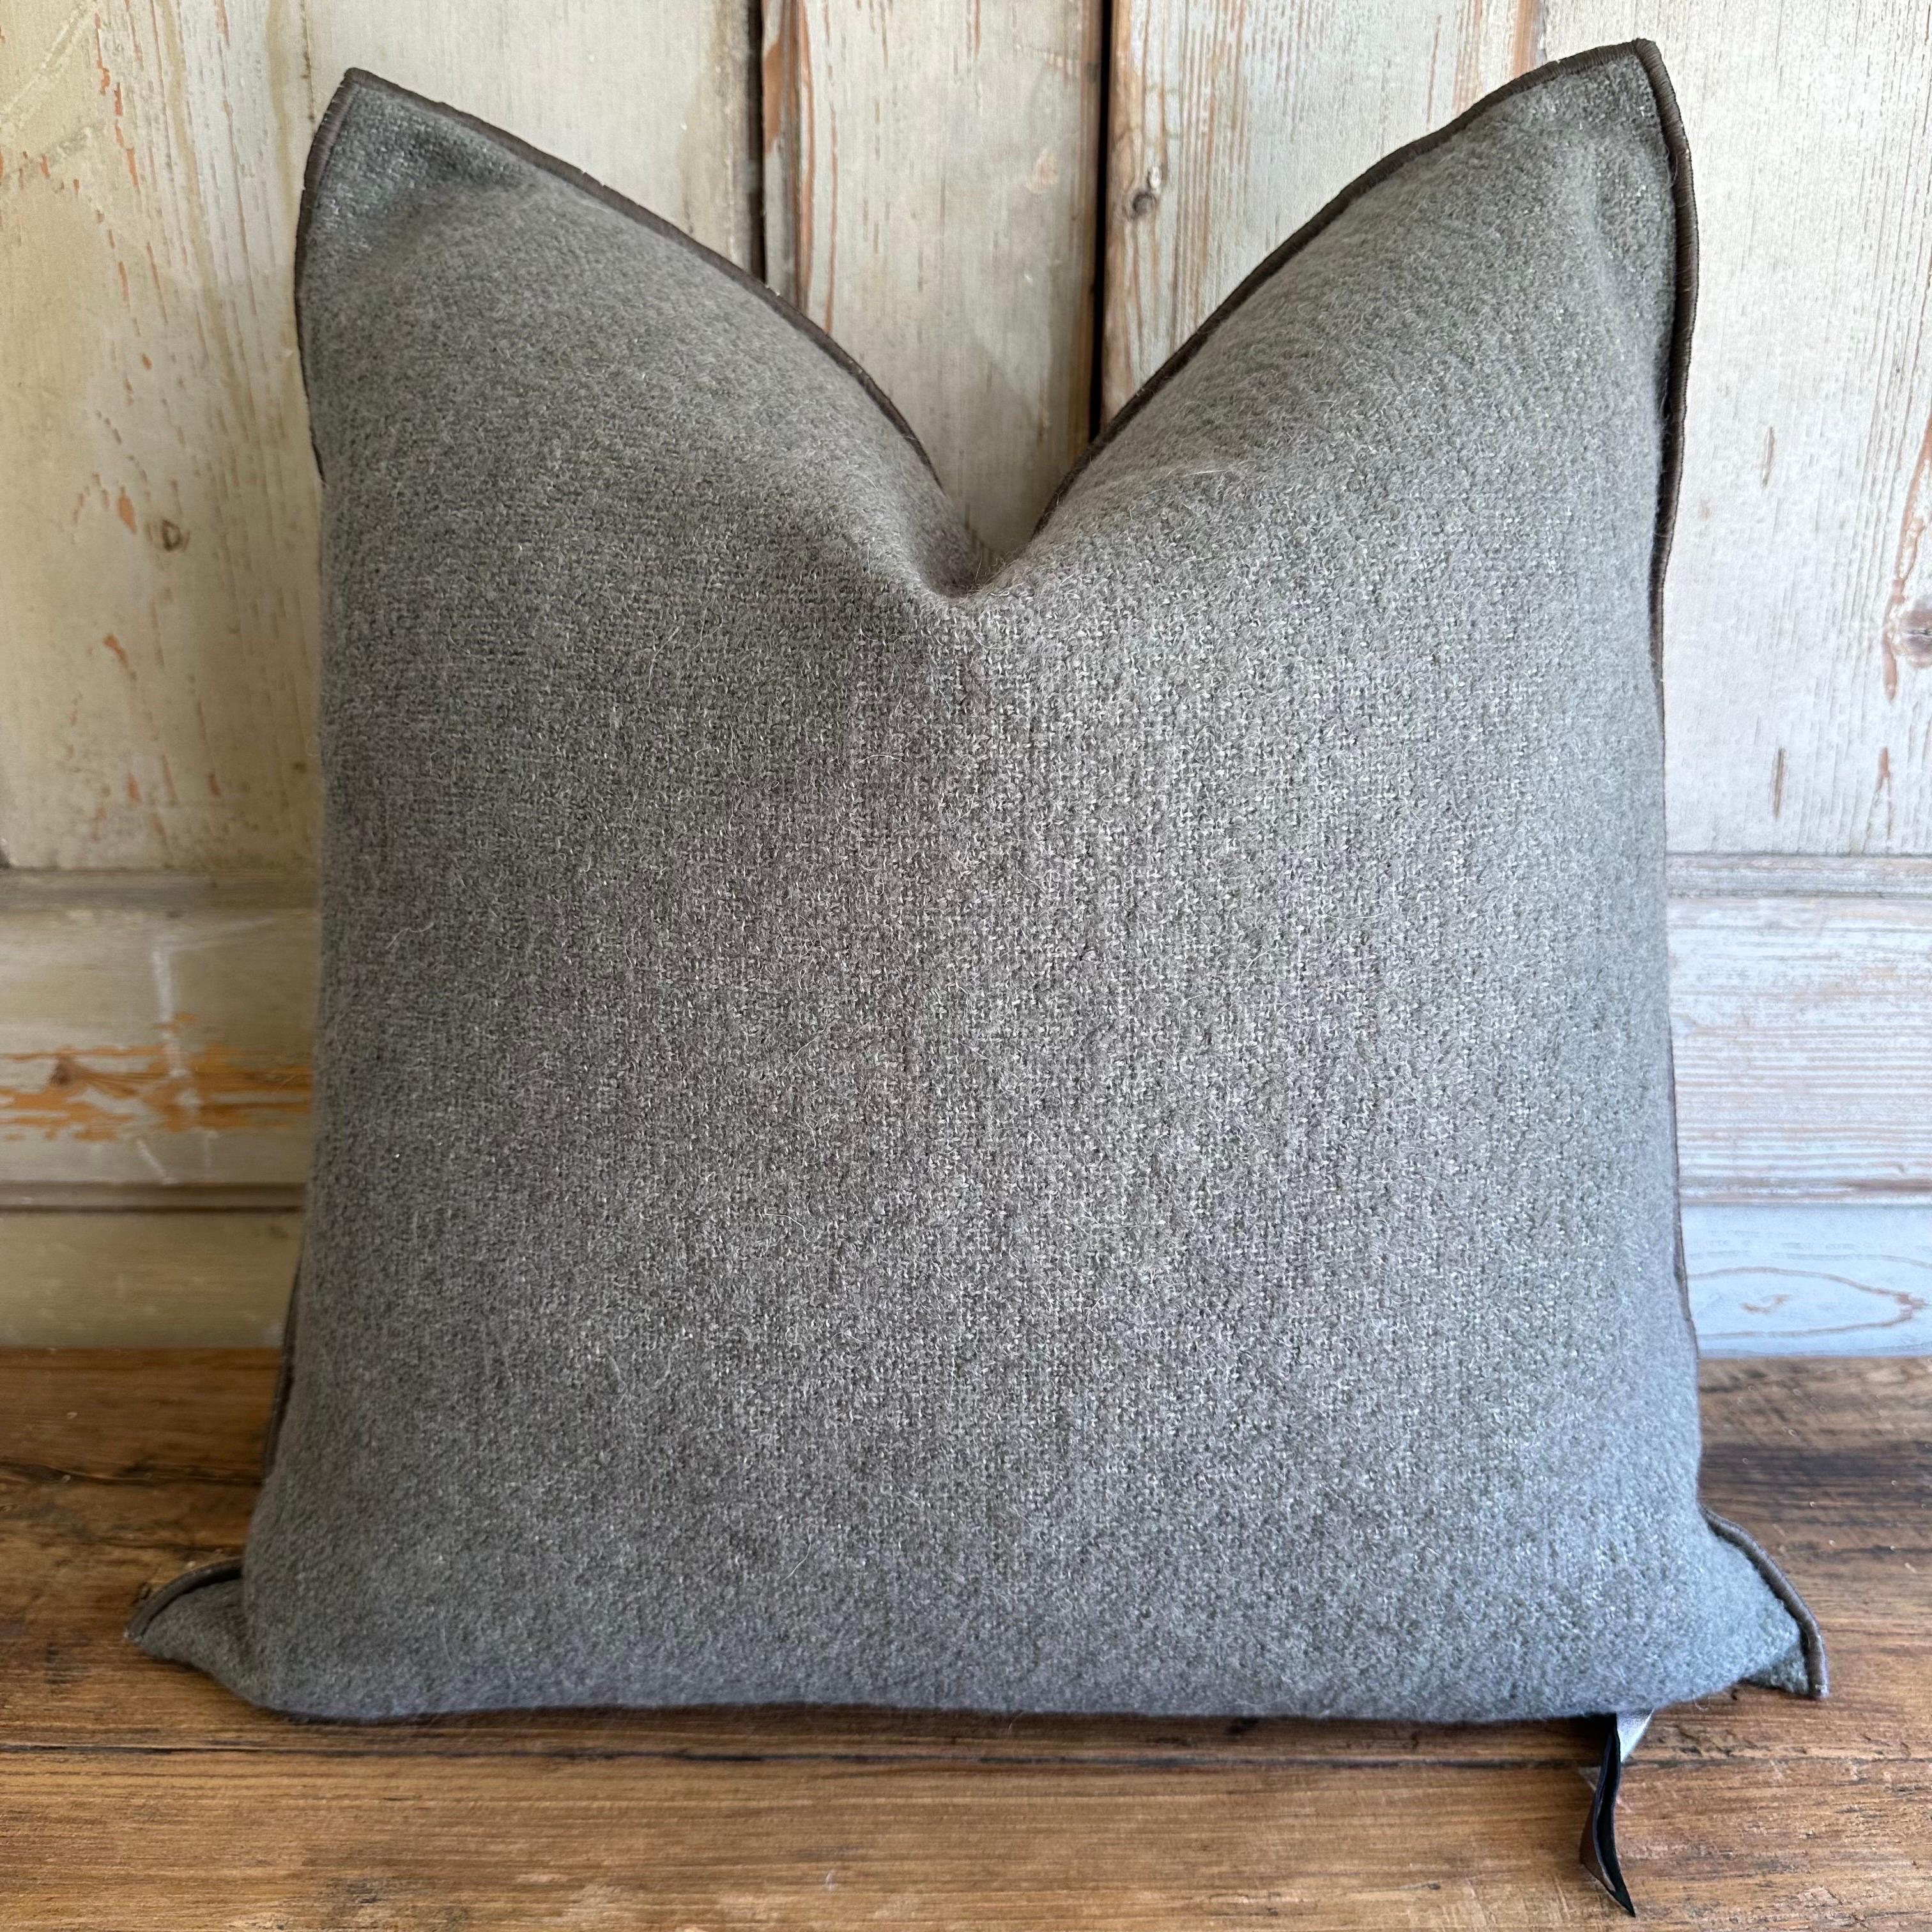 Custom wool blend accent pillow with down insert.
Color: ecorce which is a dark elephant gray colored nubby boucle style pillow with a stitched edge, metal zipper closure. 
Size: 22” x 22”
Our pillows are constructed with vintage one of a kind